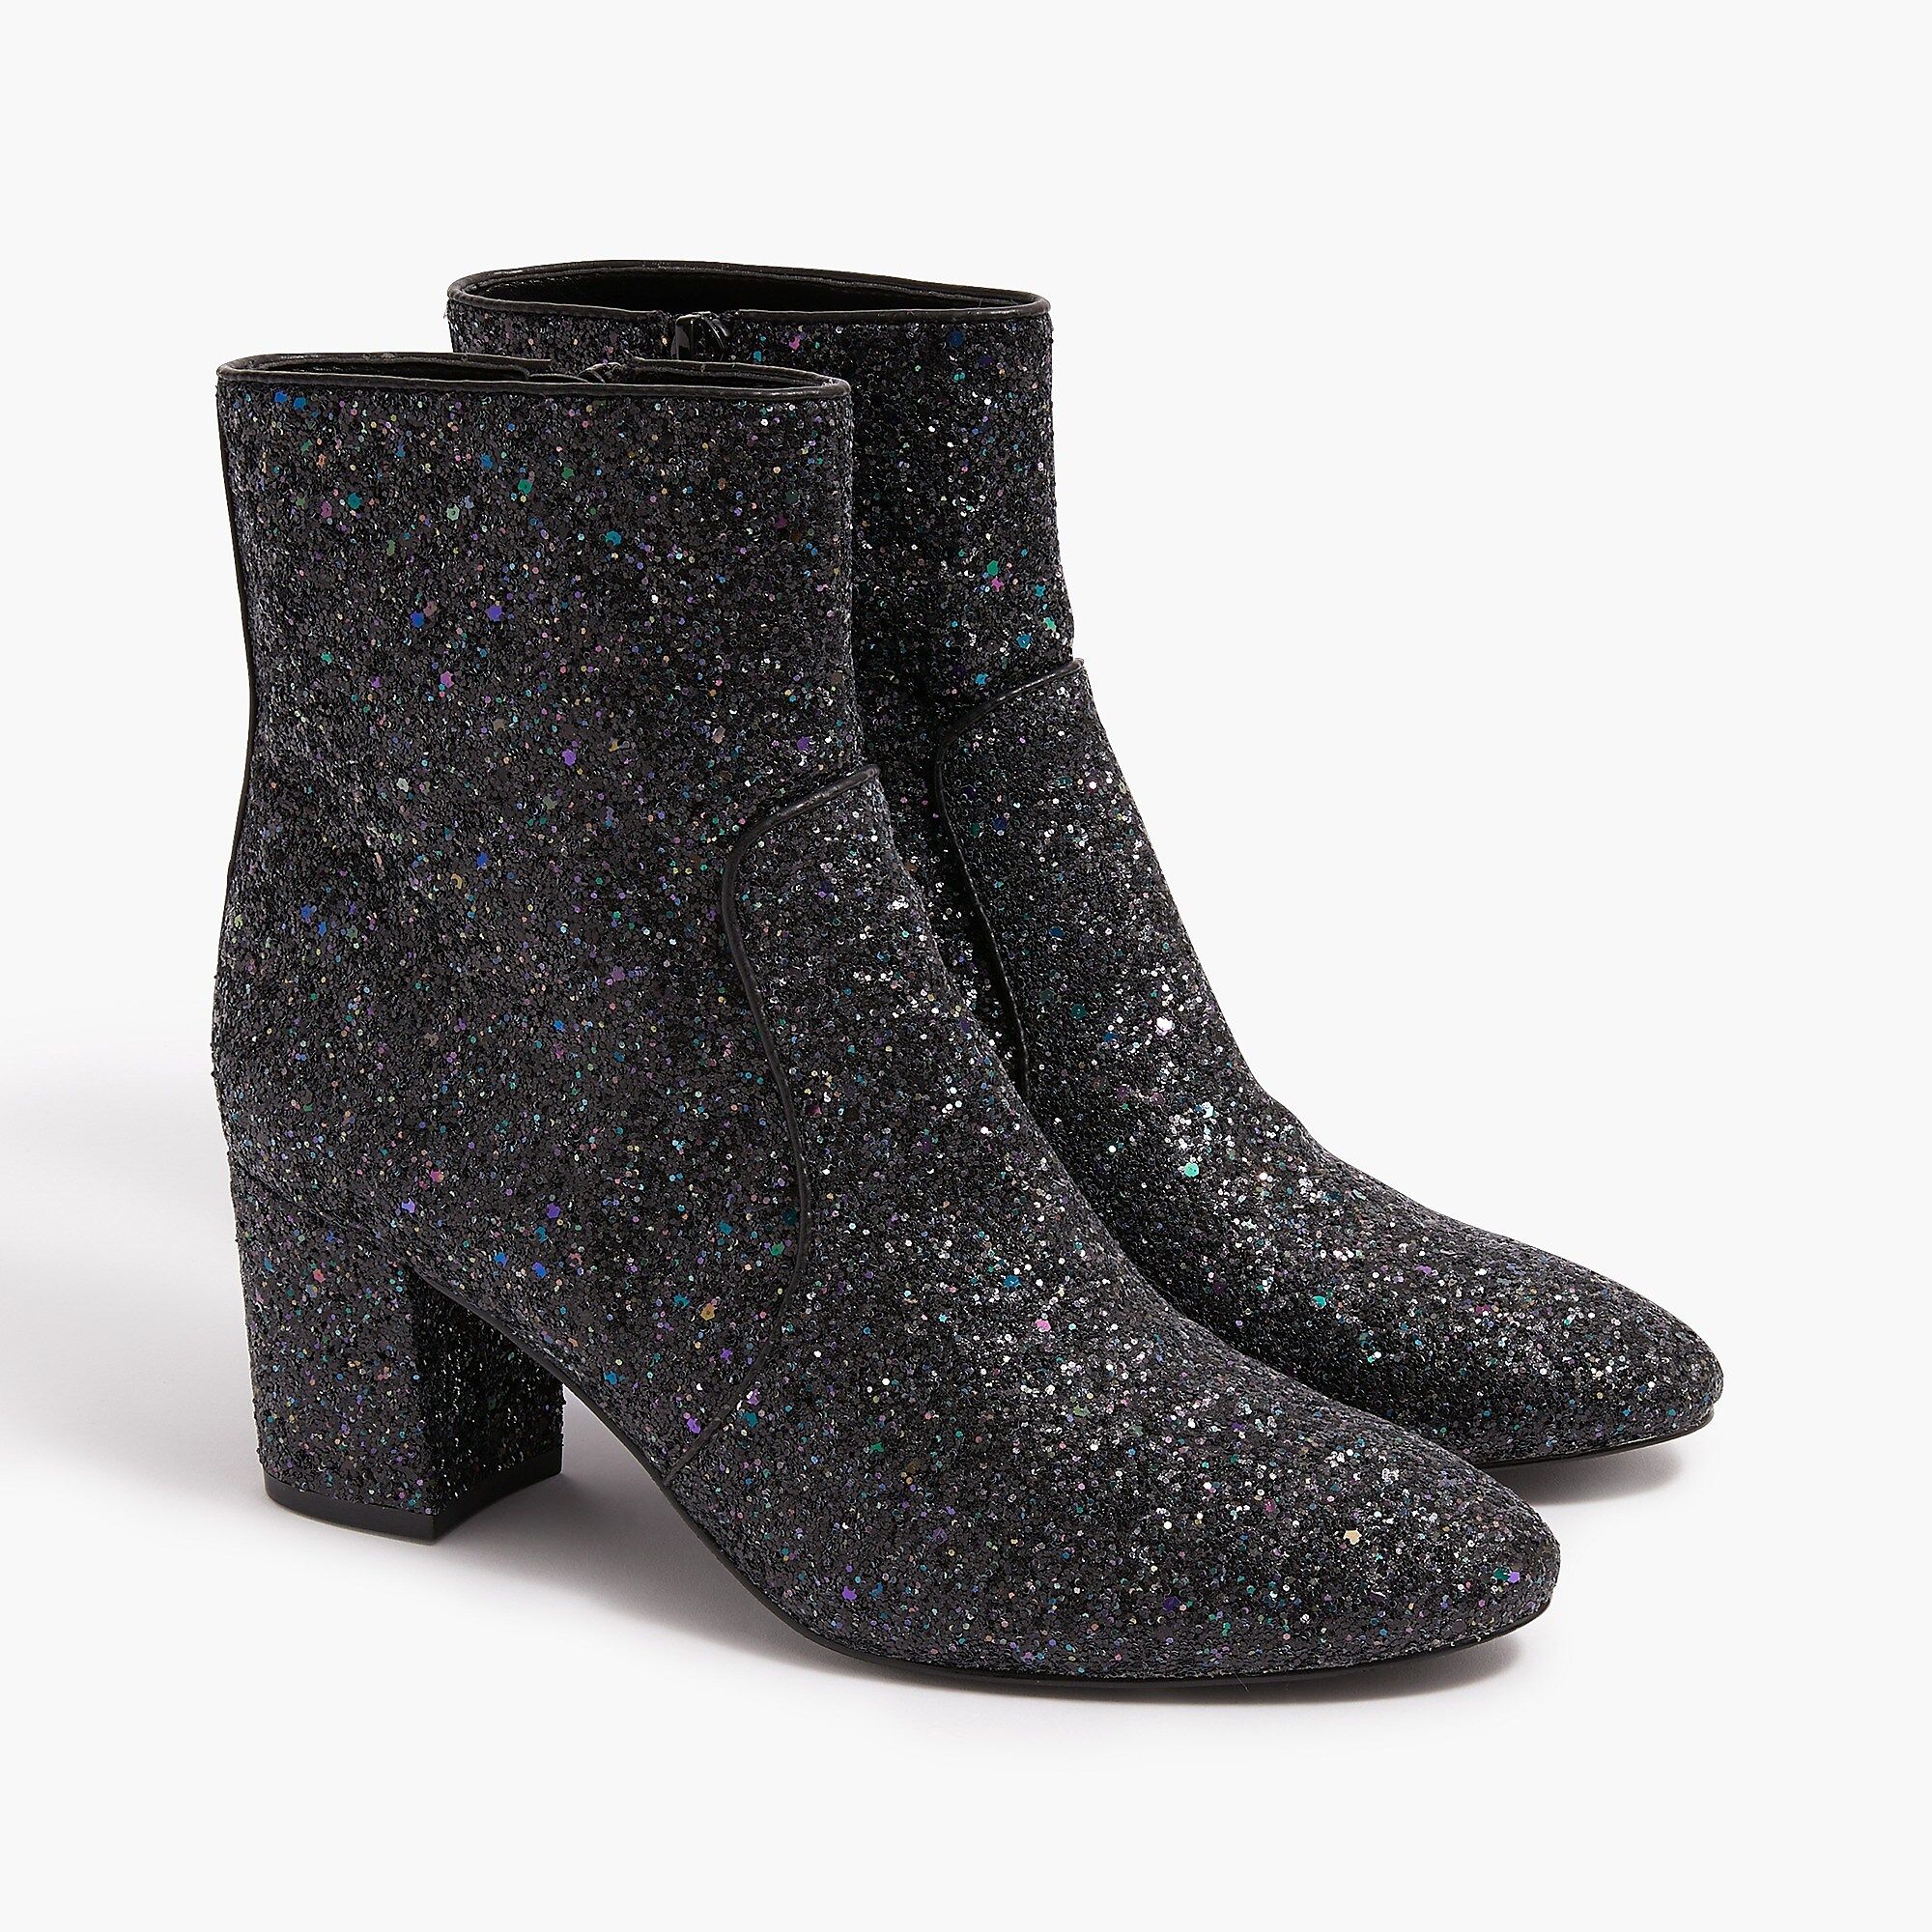 Glitter ankle boots | J.Crew Factory